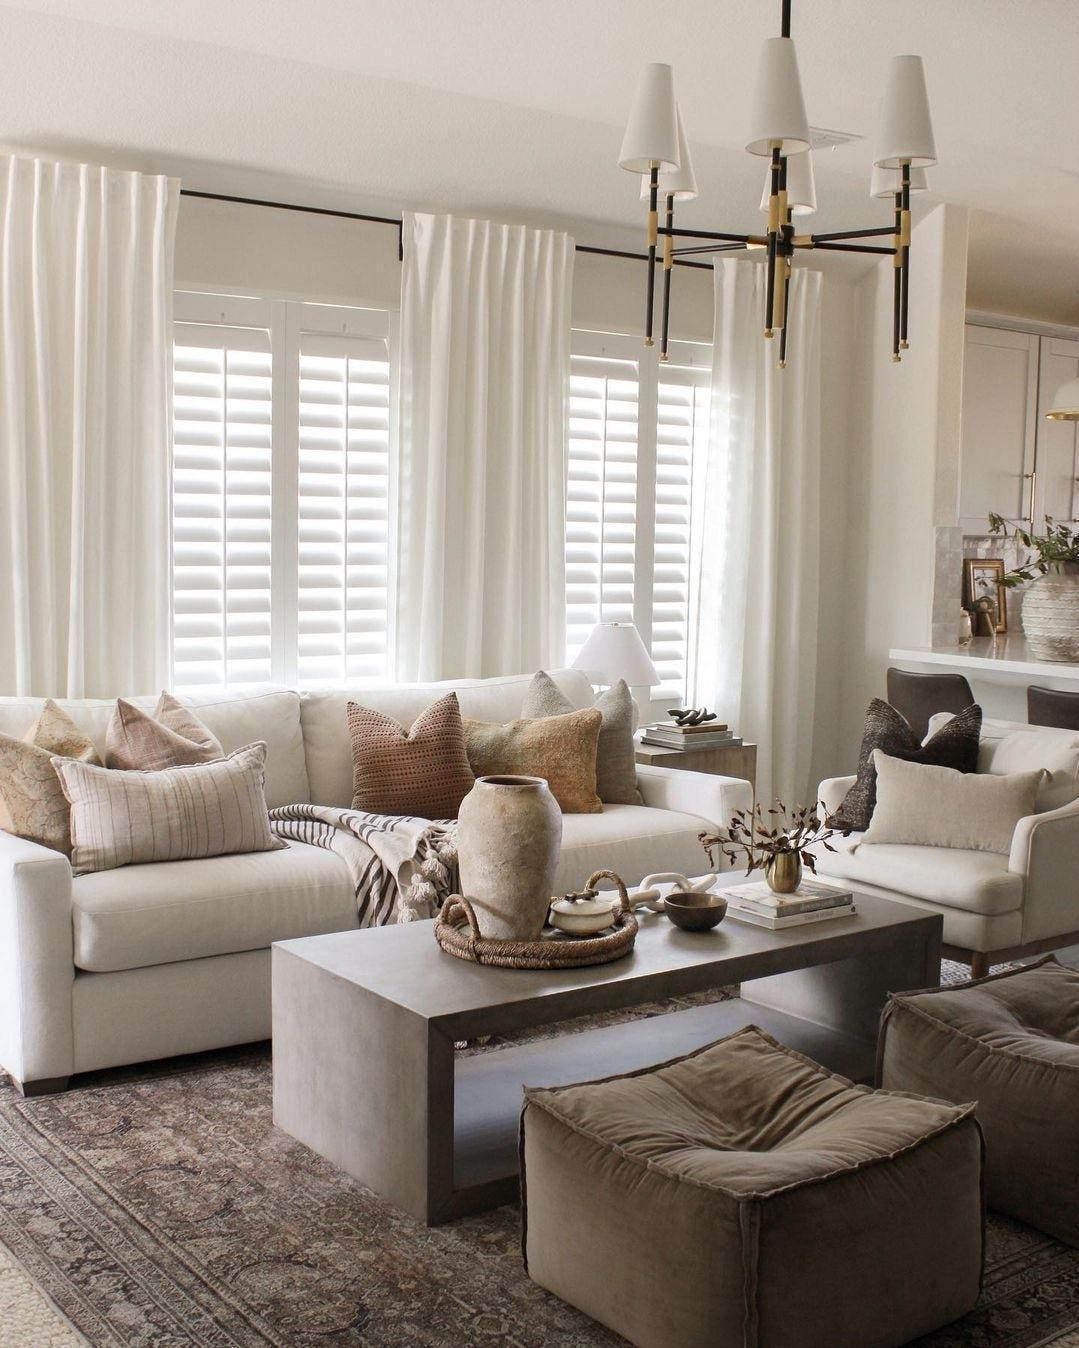 Transform Your Living Room with Elegant Drapes for the Perfect Window Treatment